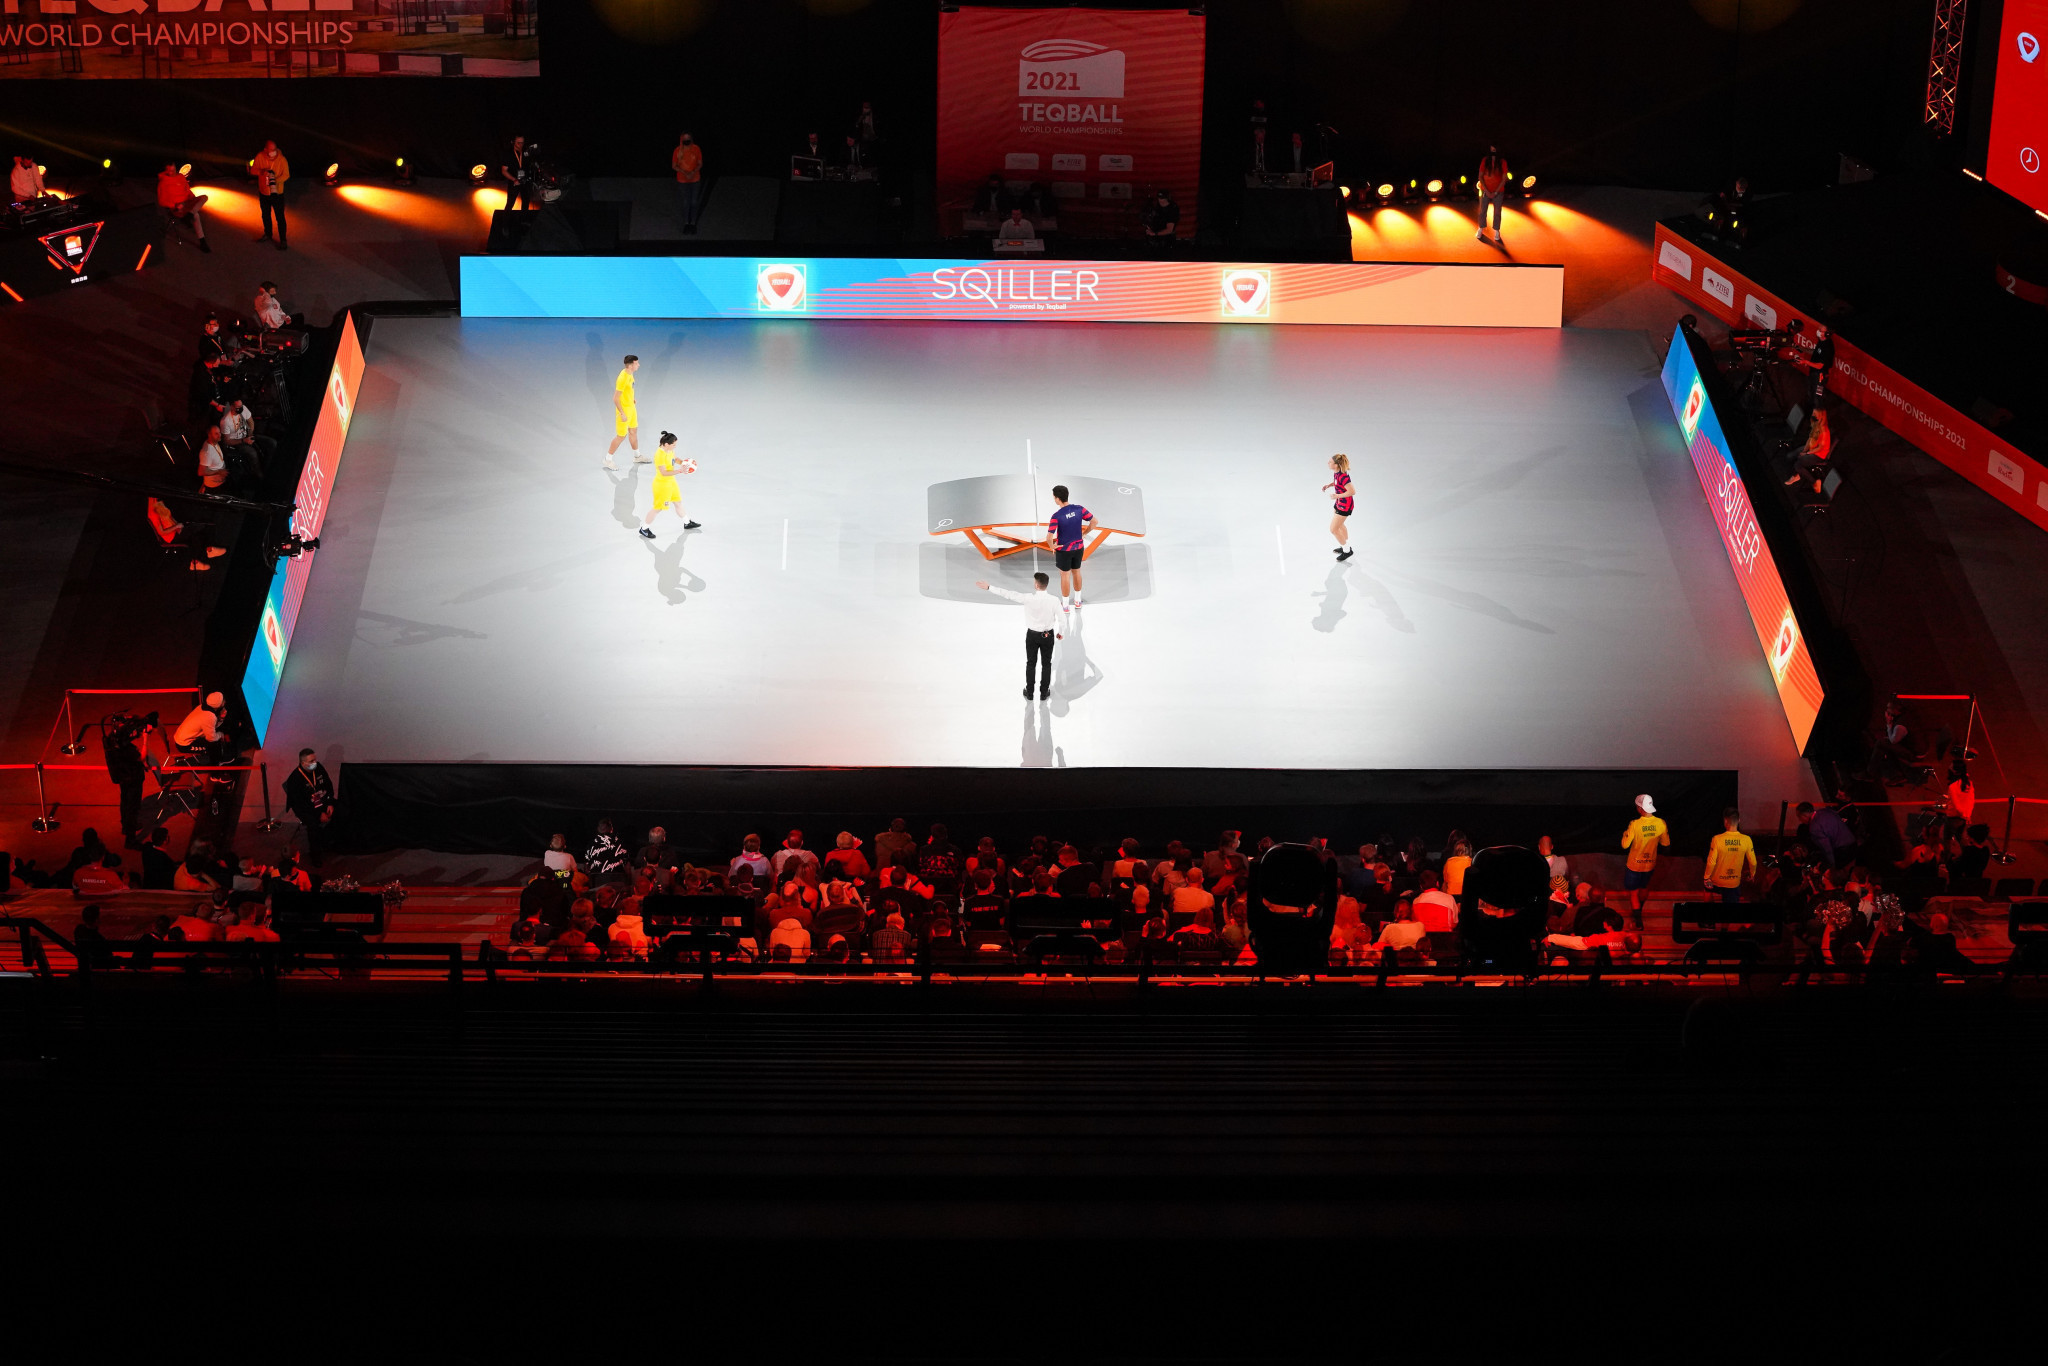 insidethegames is reporting LIVE from the Teqball World Championships in Nuremberg